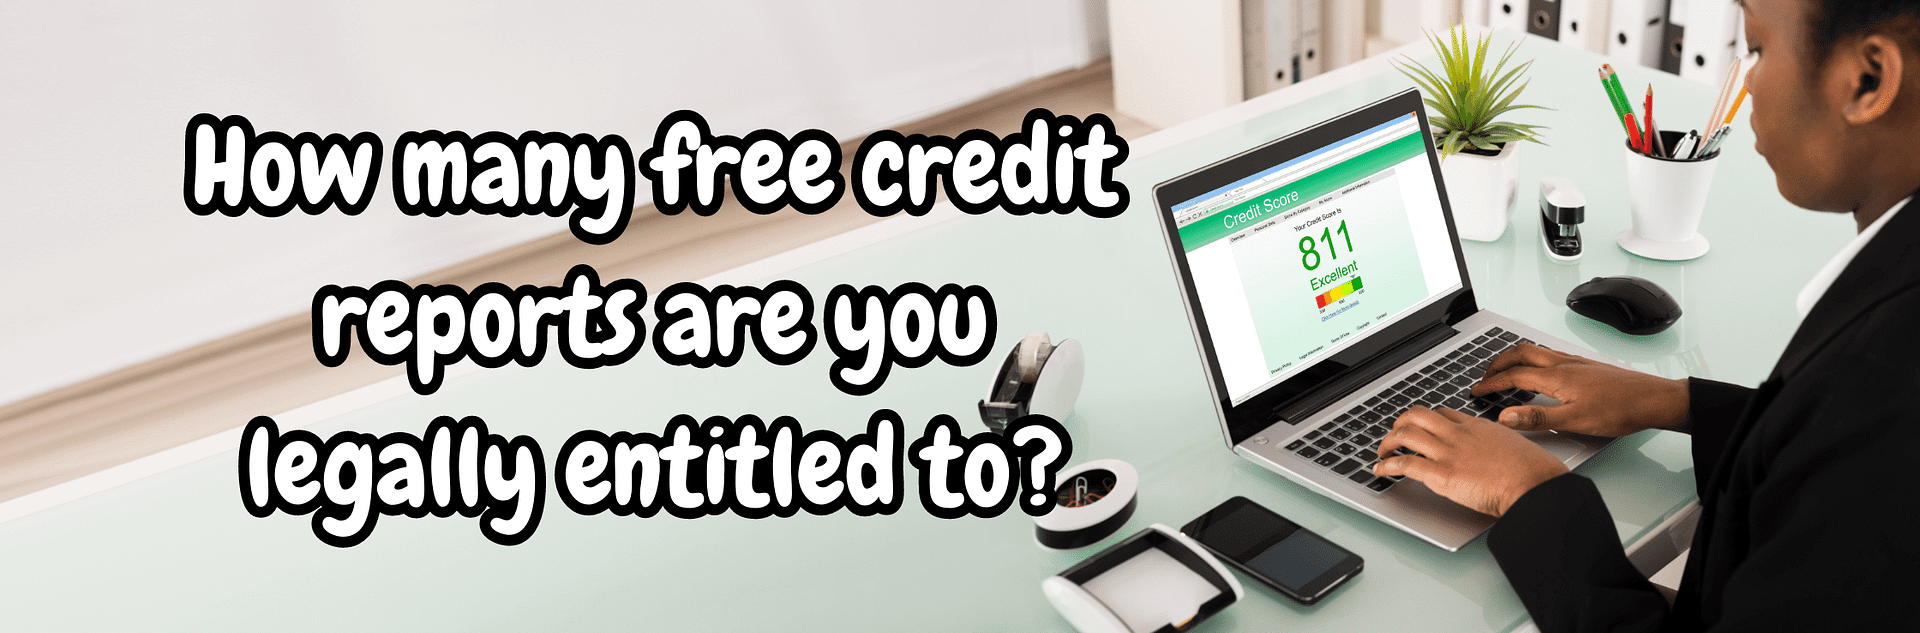 free credit report service authorized by federal law but only accessible once a year